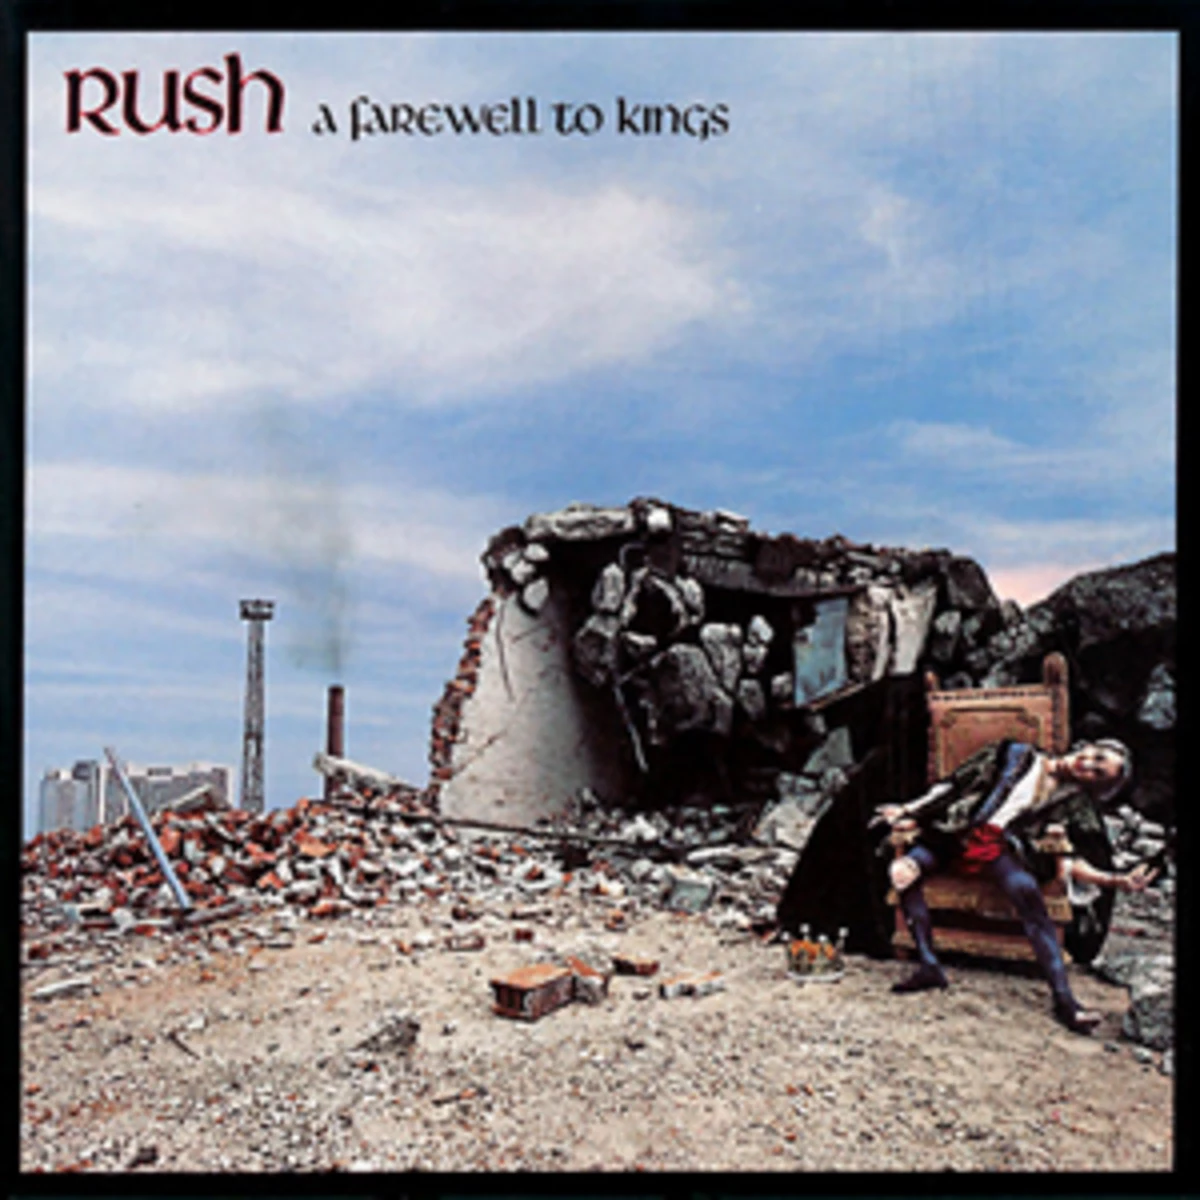 WPDH Album of the Week: Rush 'A Farewell to Kings'